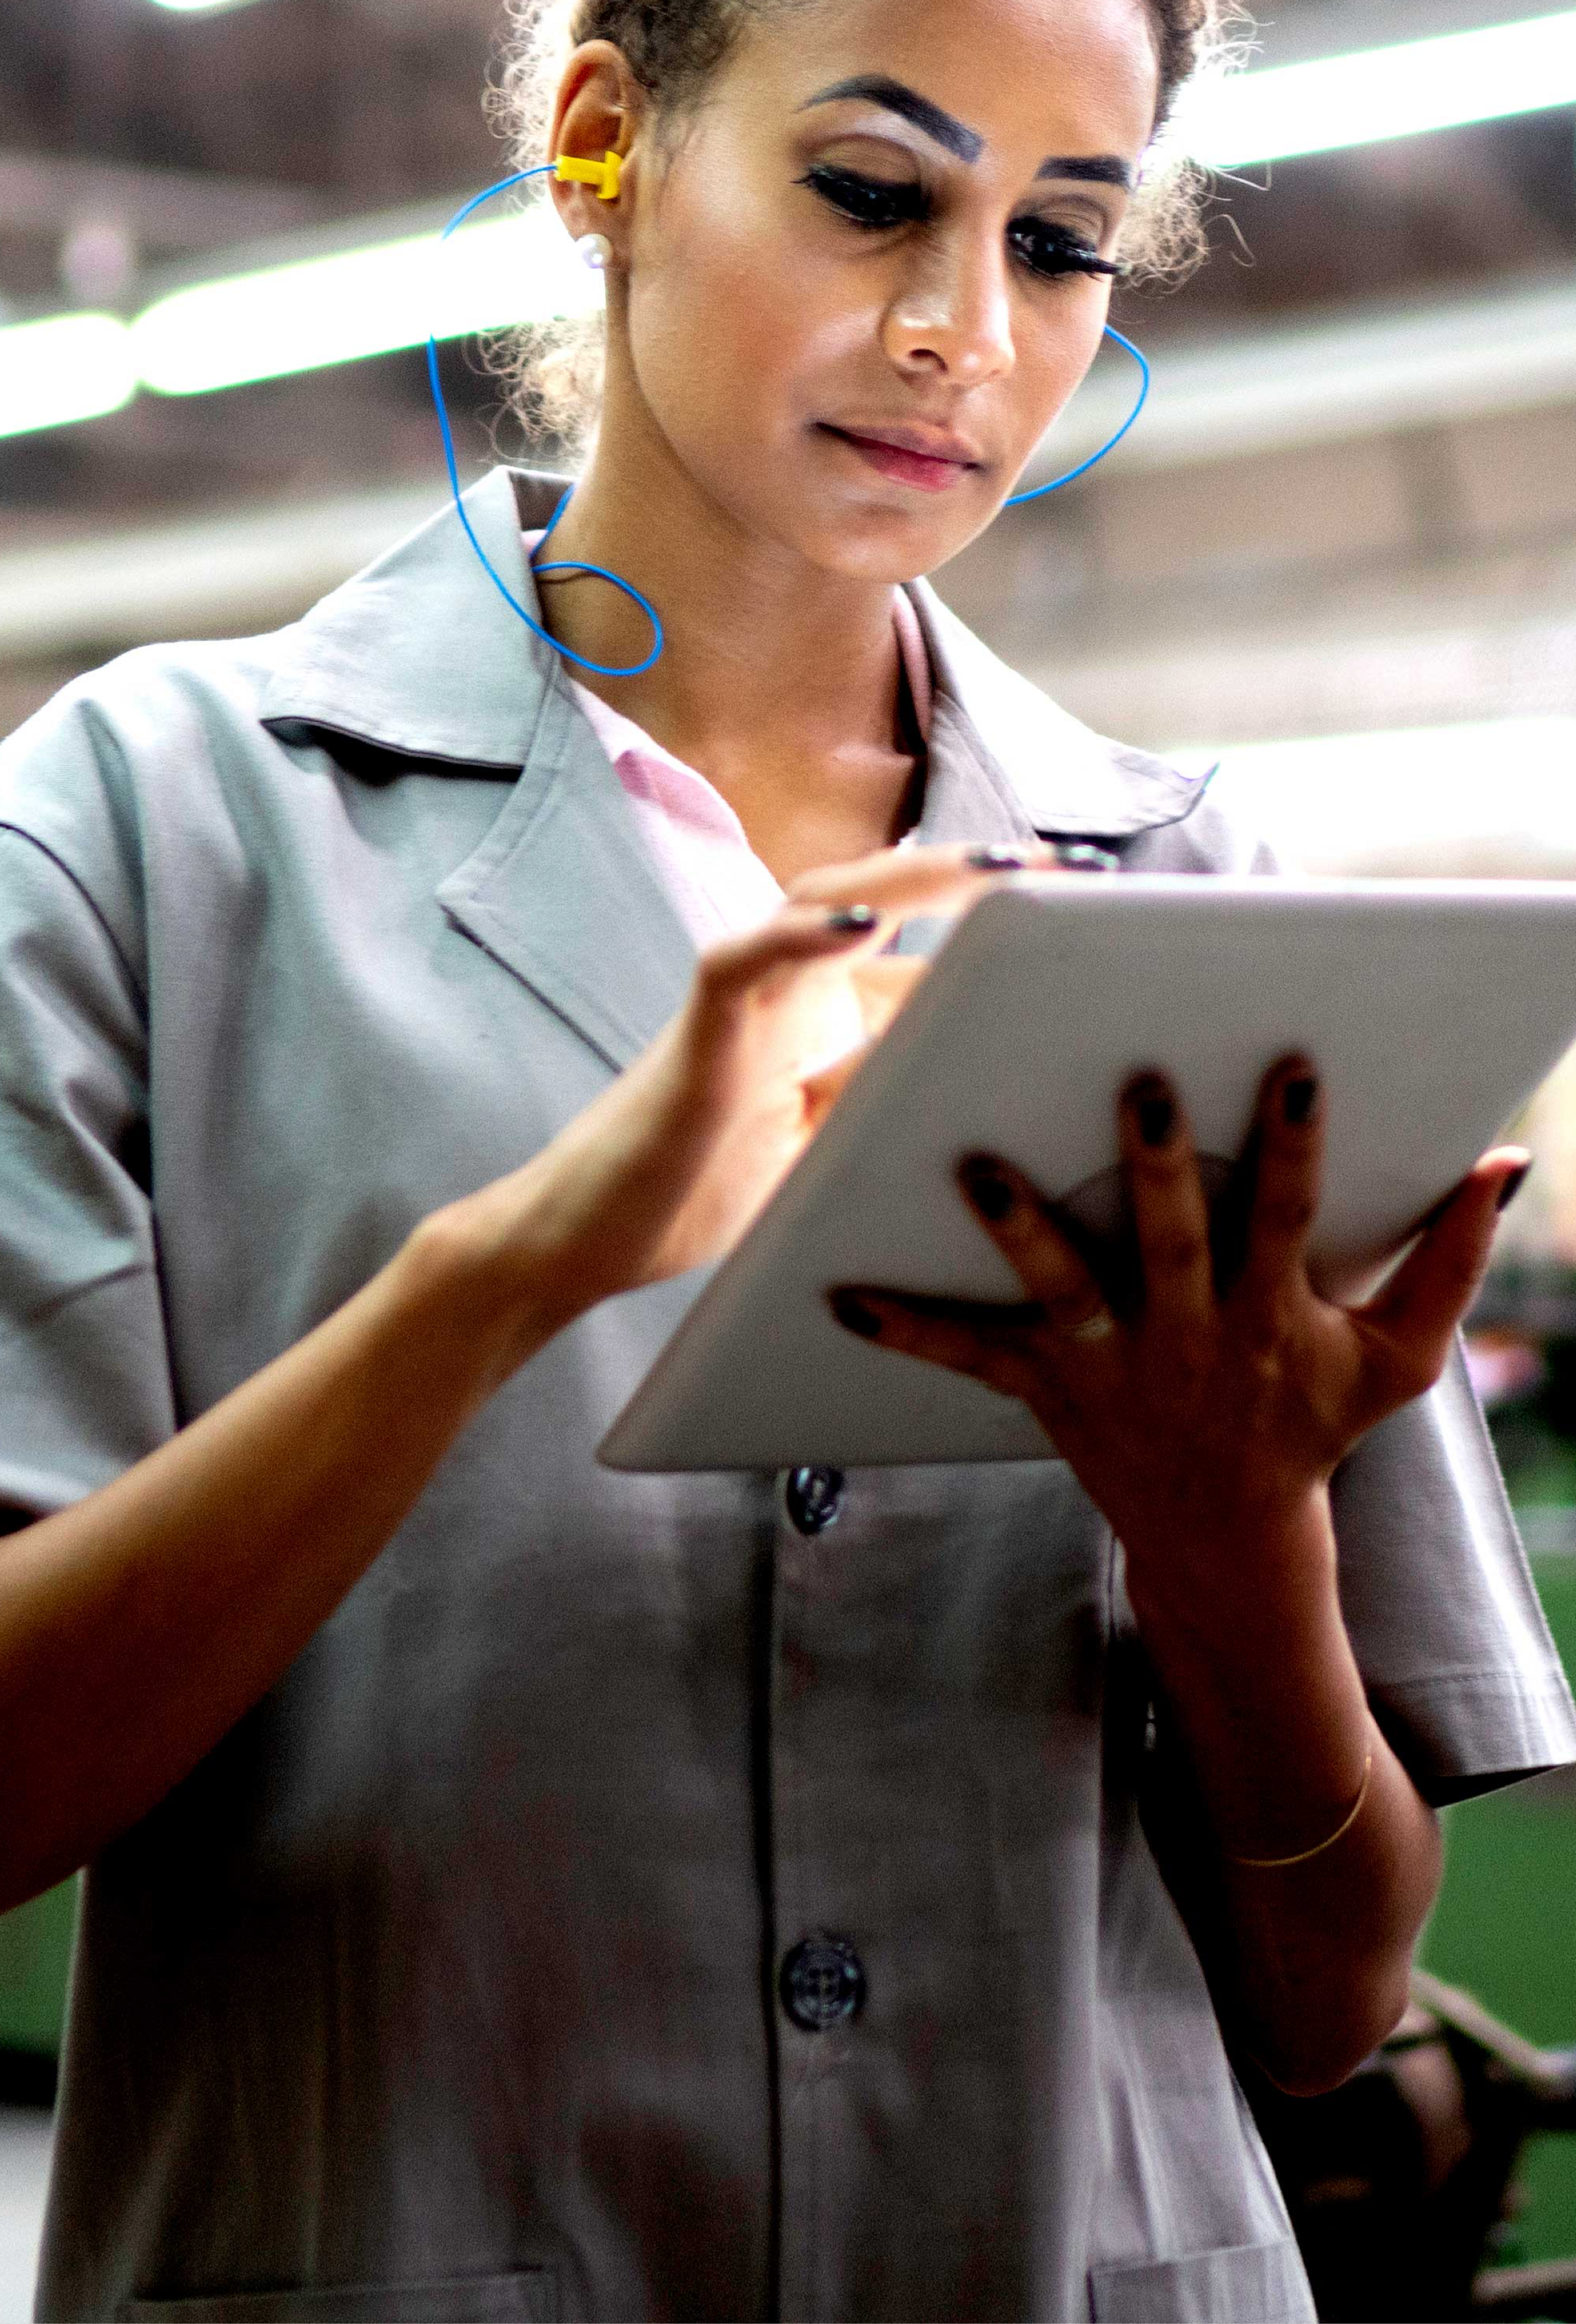 Image of blonde wearing yellow earplugs and  a gray lab coat typing on an ipad